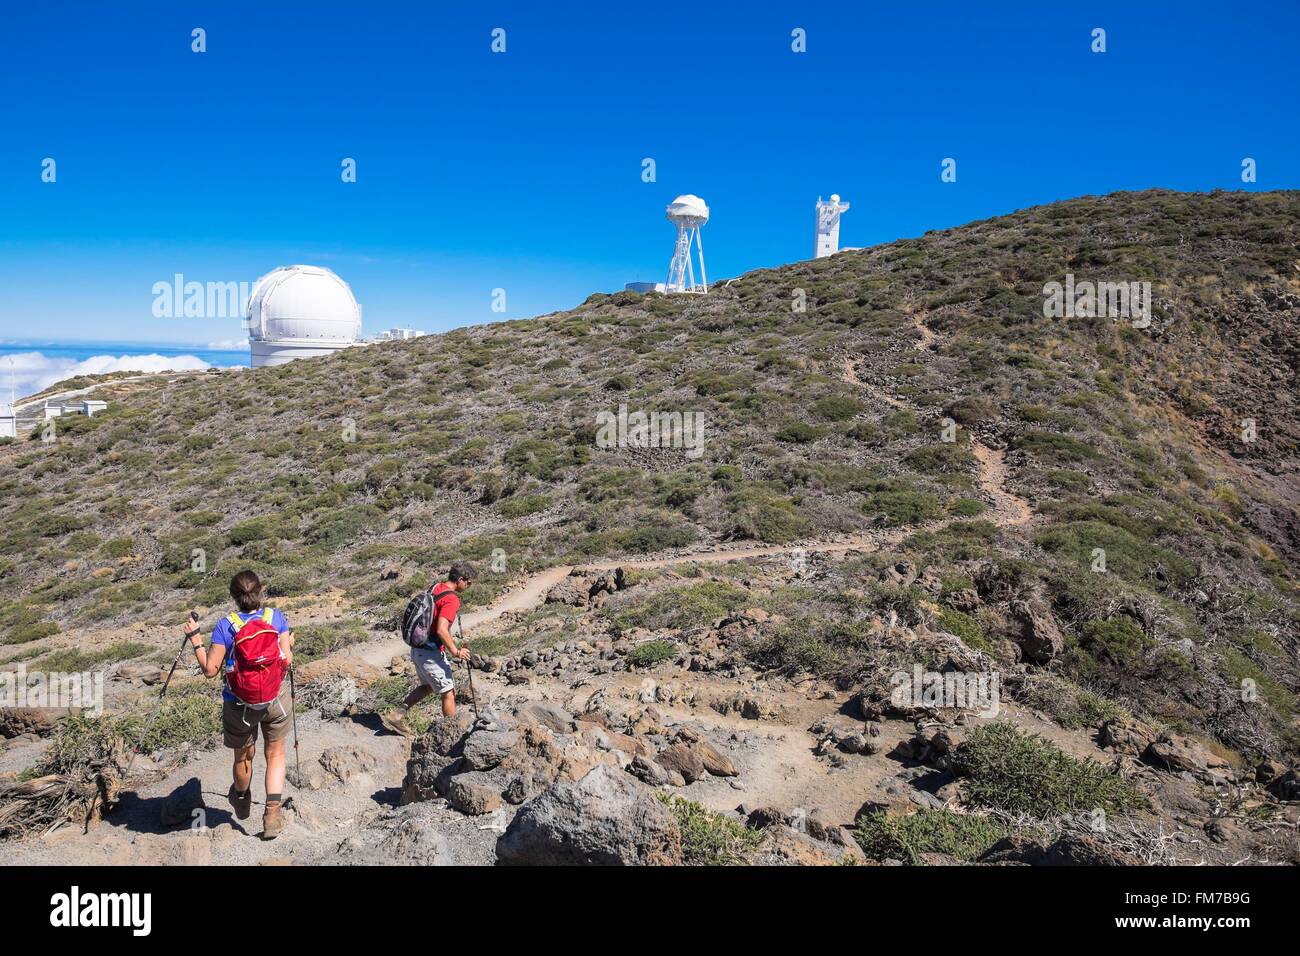 Spain, Canary Islands, La Palma island declared a Biosphere Reserve by UNESCO, Caldera de Taburiente National Park, hiking to Roque de los Muchachos, highest point of the island (alt : 2426m), the Astrophysical Observatory in the background Stock Photo